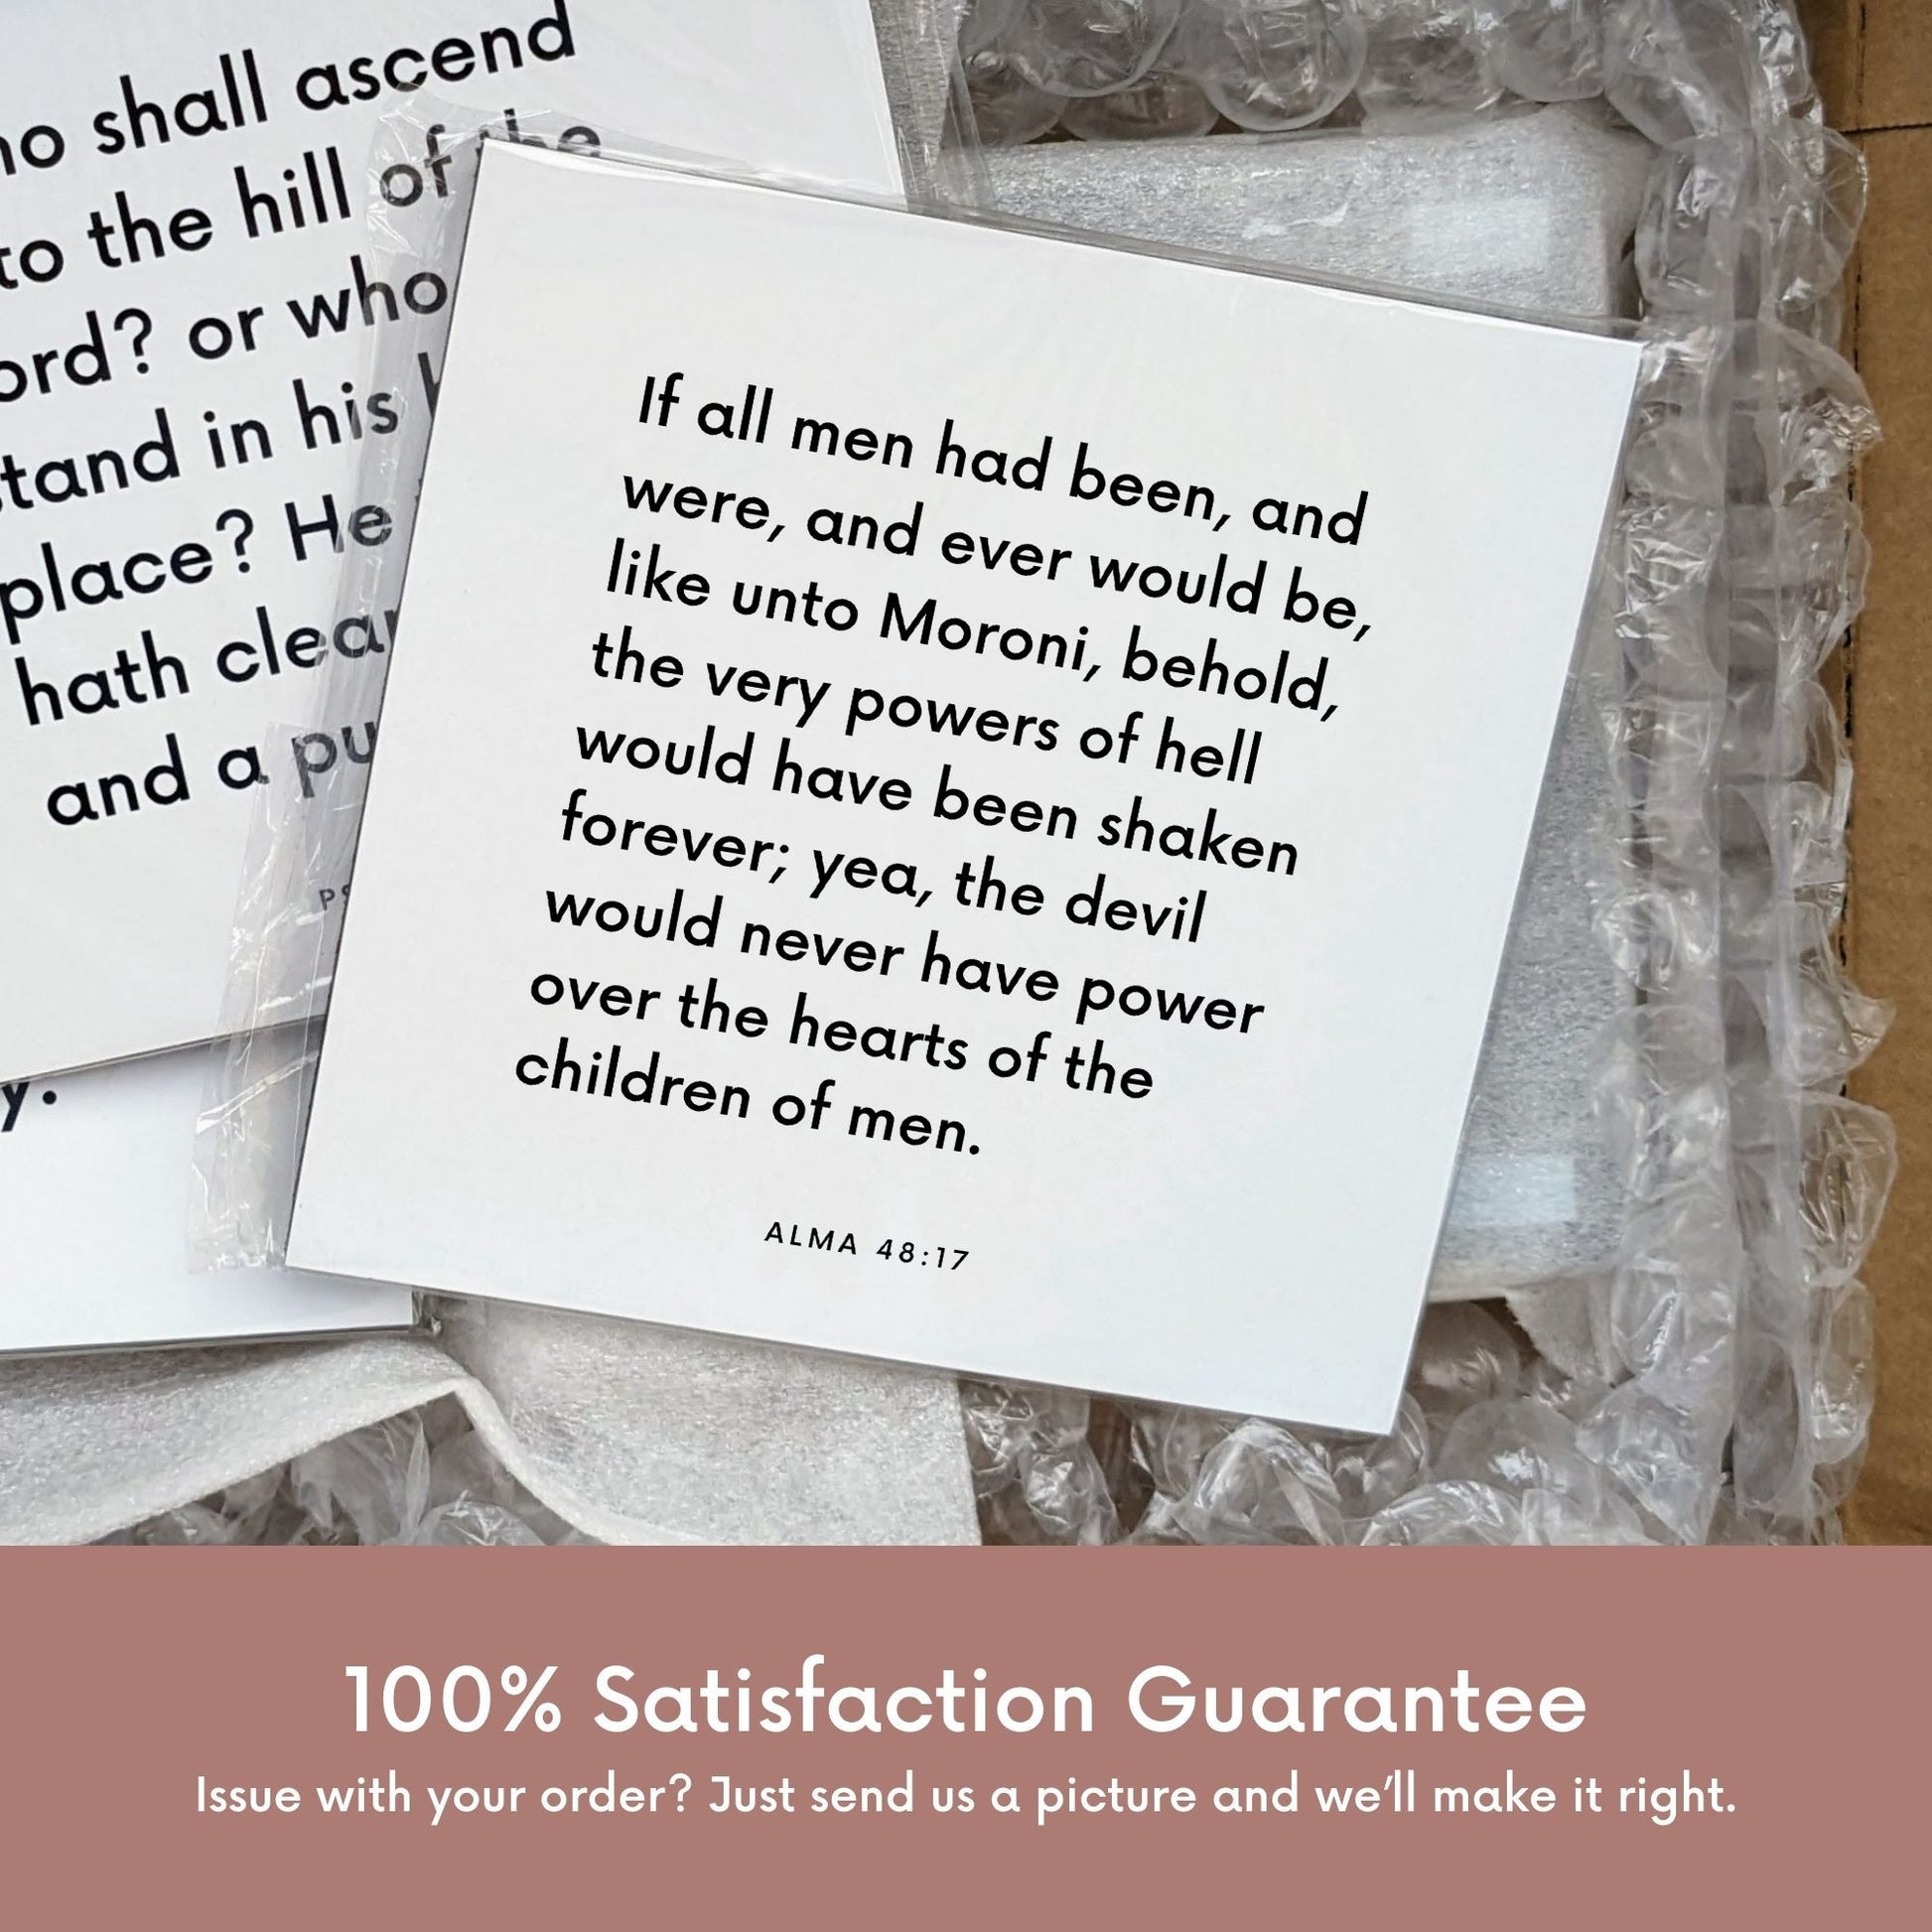 Shipping materials for scripture tile of Alma 48:17 - "If all men were like unto Moroni"